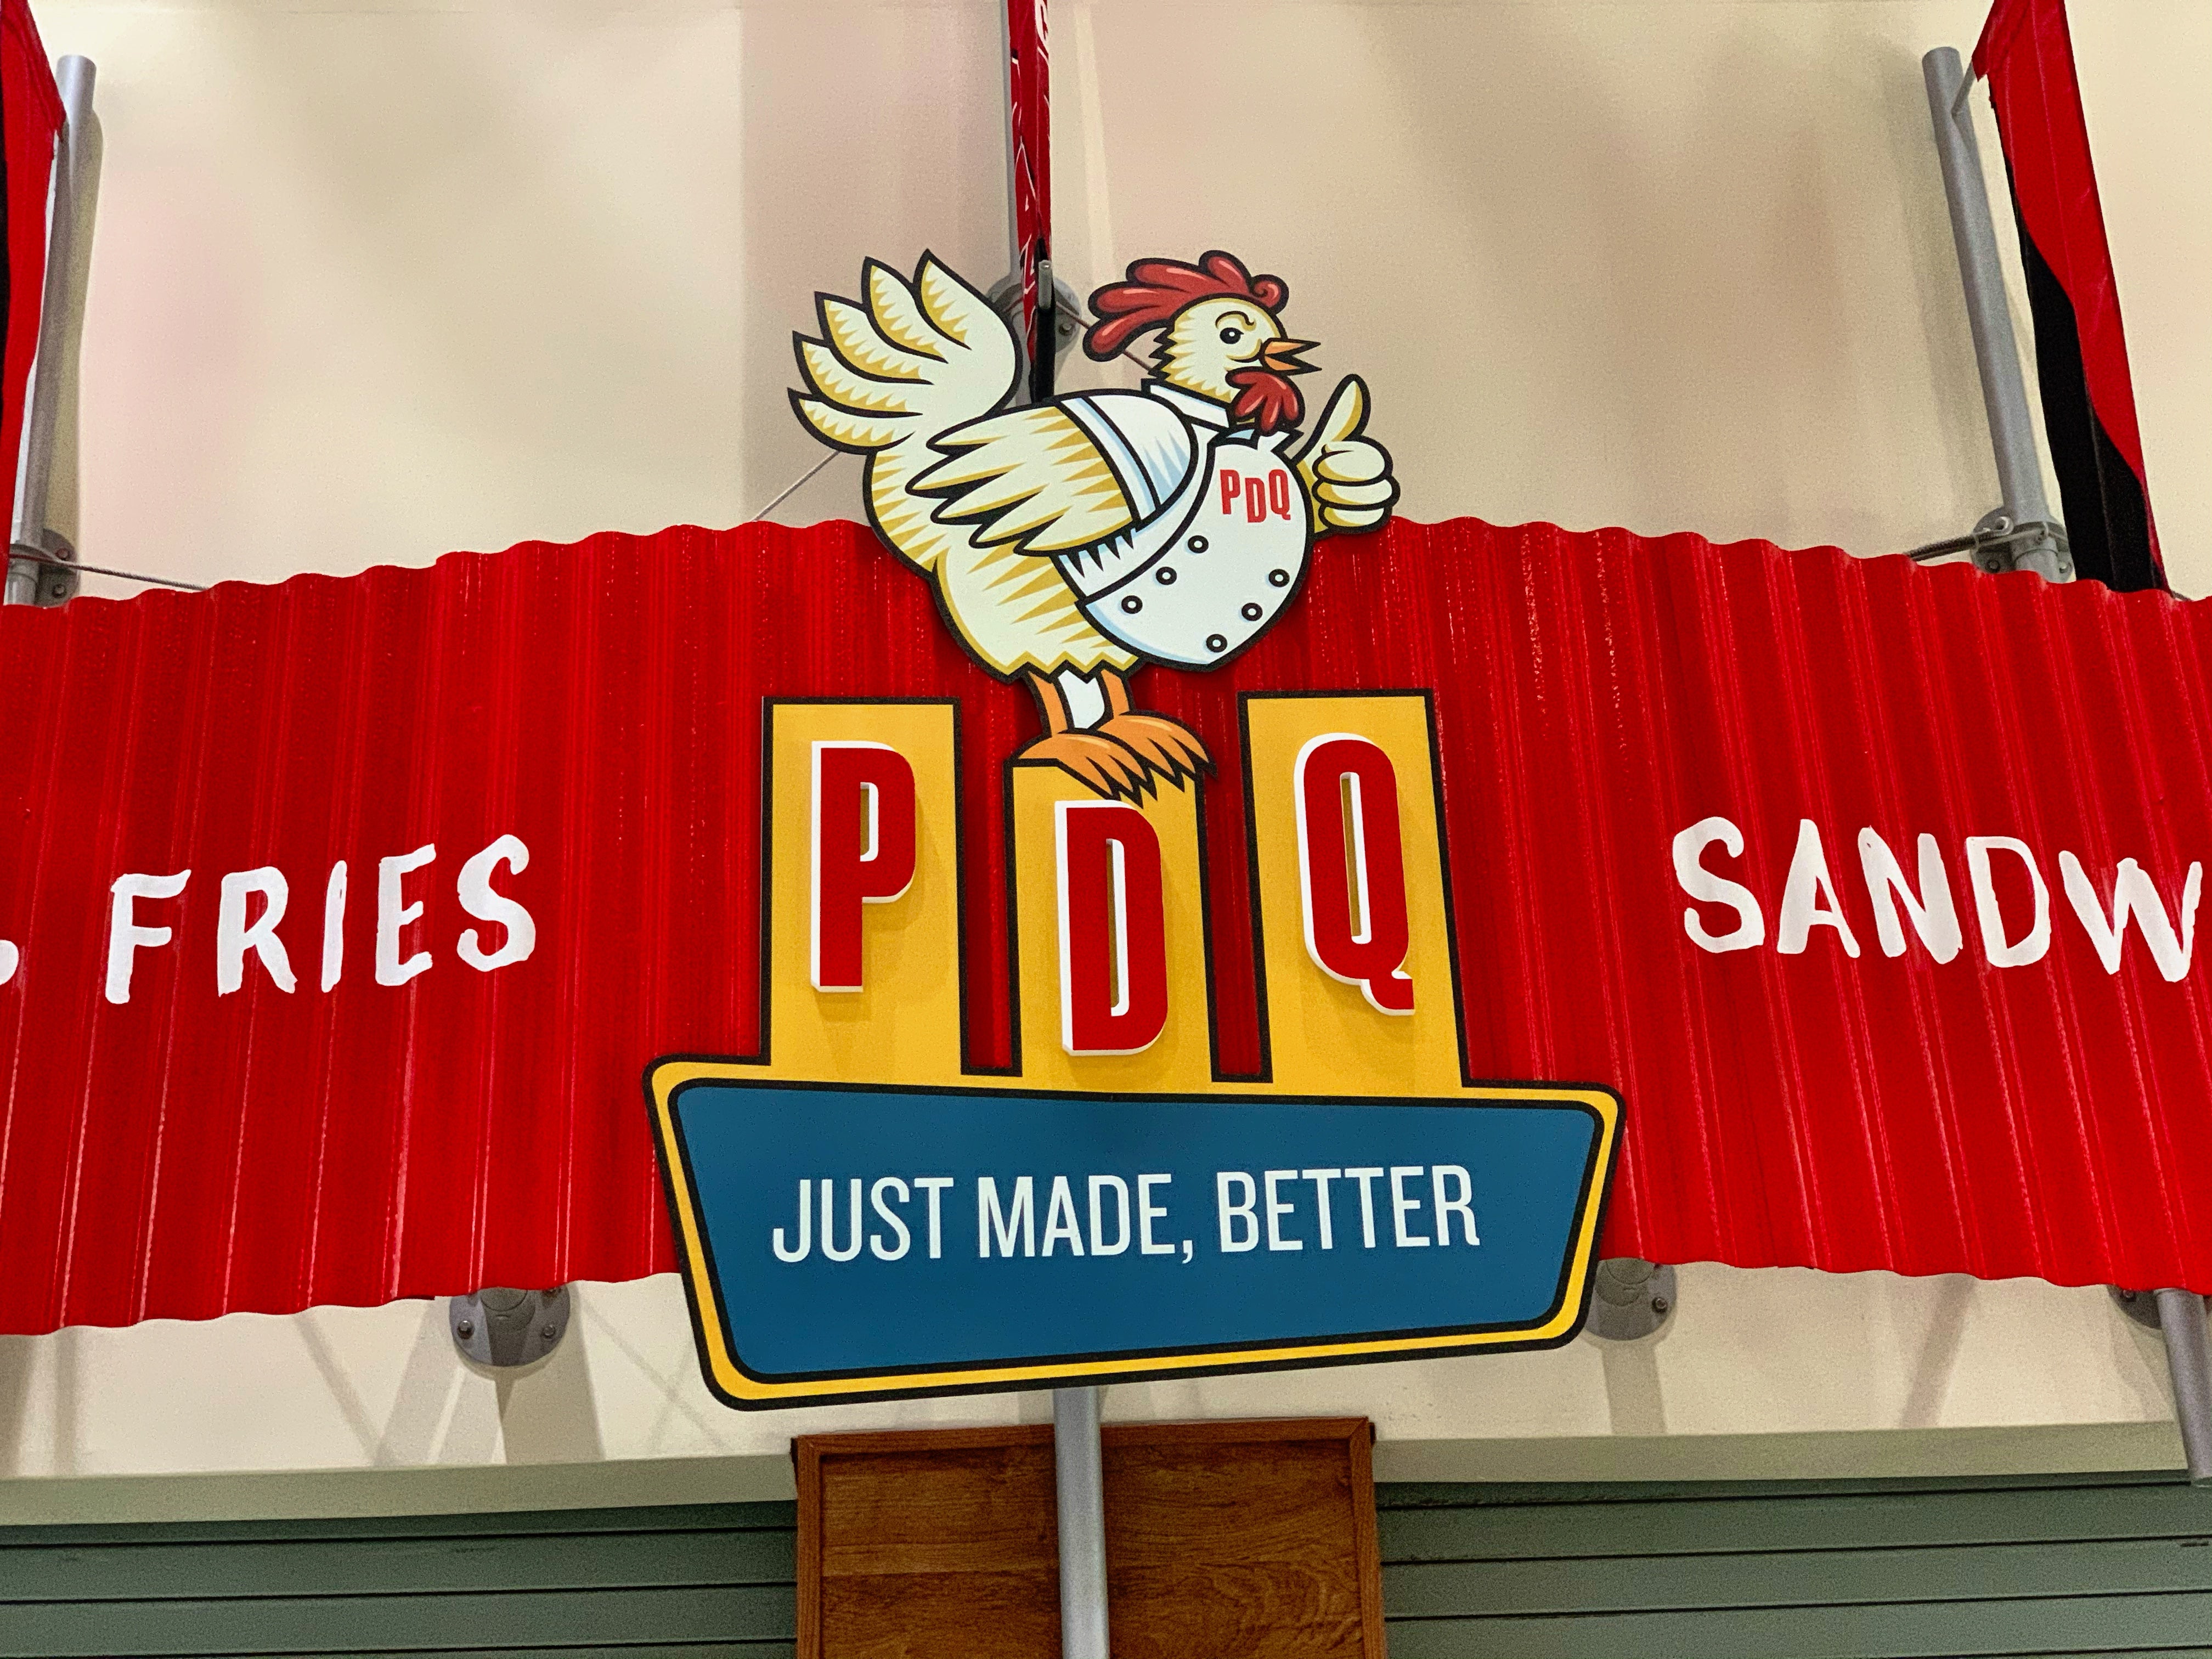 PDQ: Section 130